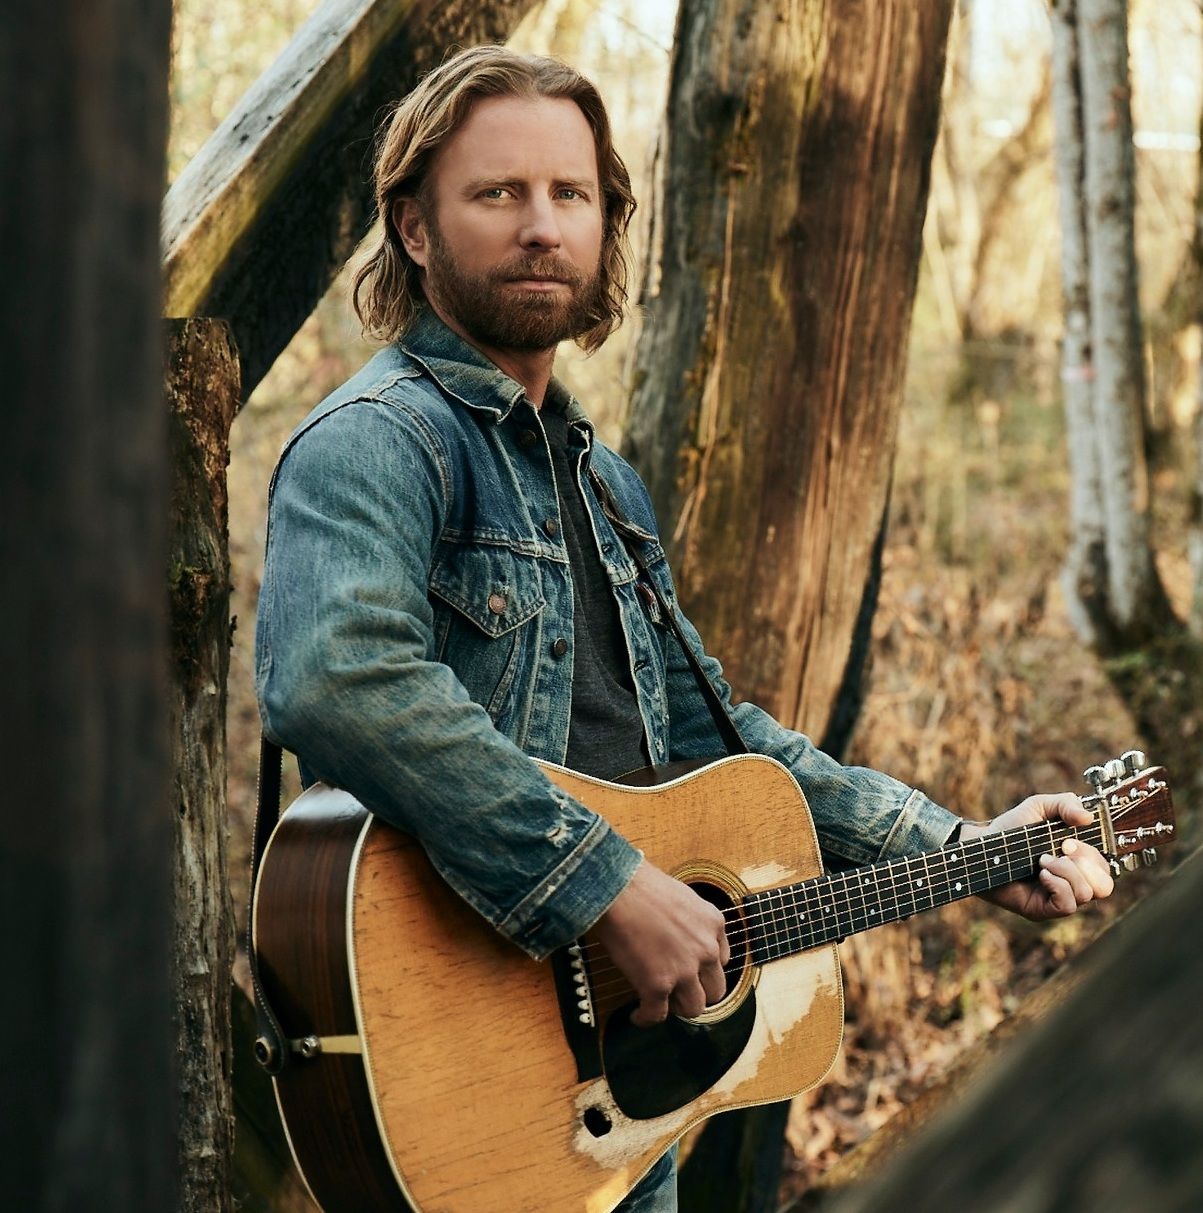 DIERKS BENTLEY’S GRATEFUL “GOLD” SETS THE STAGE FOR HIS 10TH ALBUM